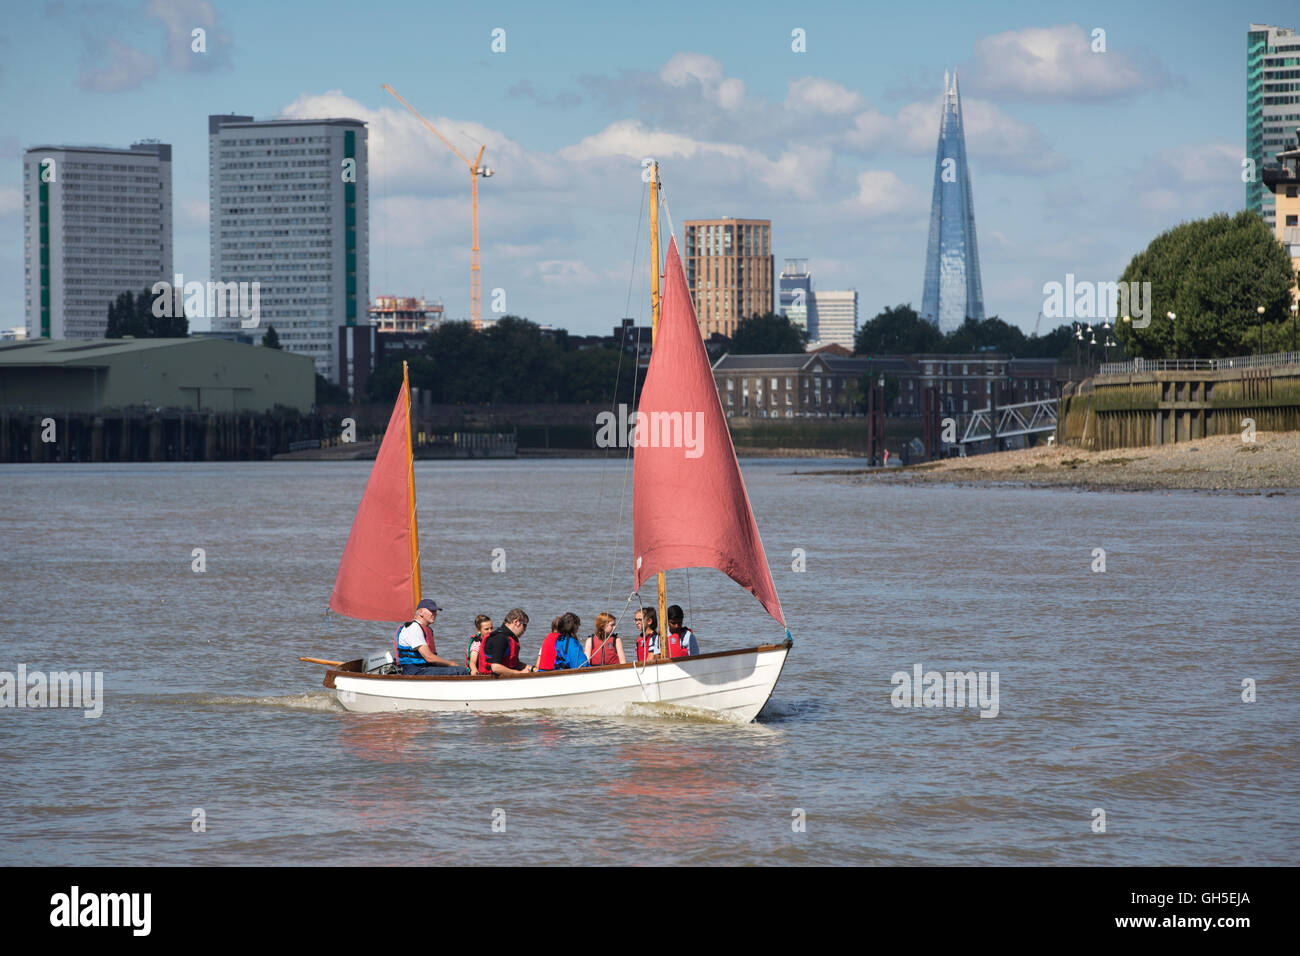 Group enjoying a sailing trip on a wooden dingy along the River Thames, the Shard skyscraper clearly visible in distance, London Stock Photo